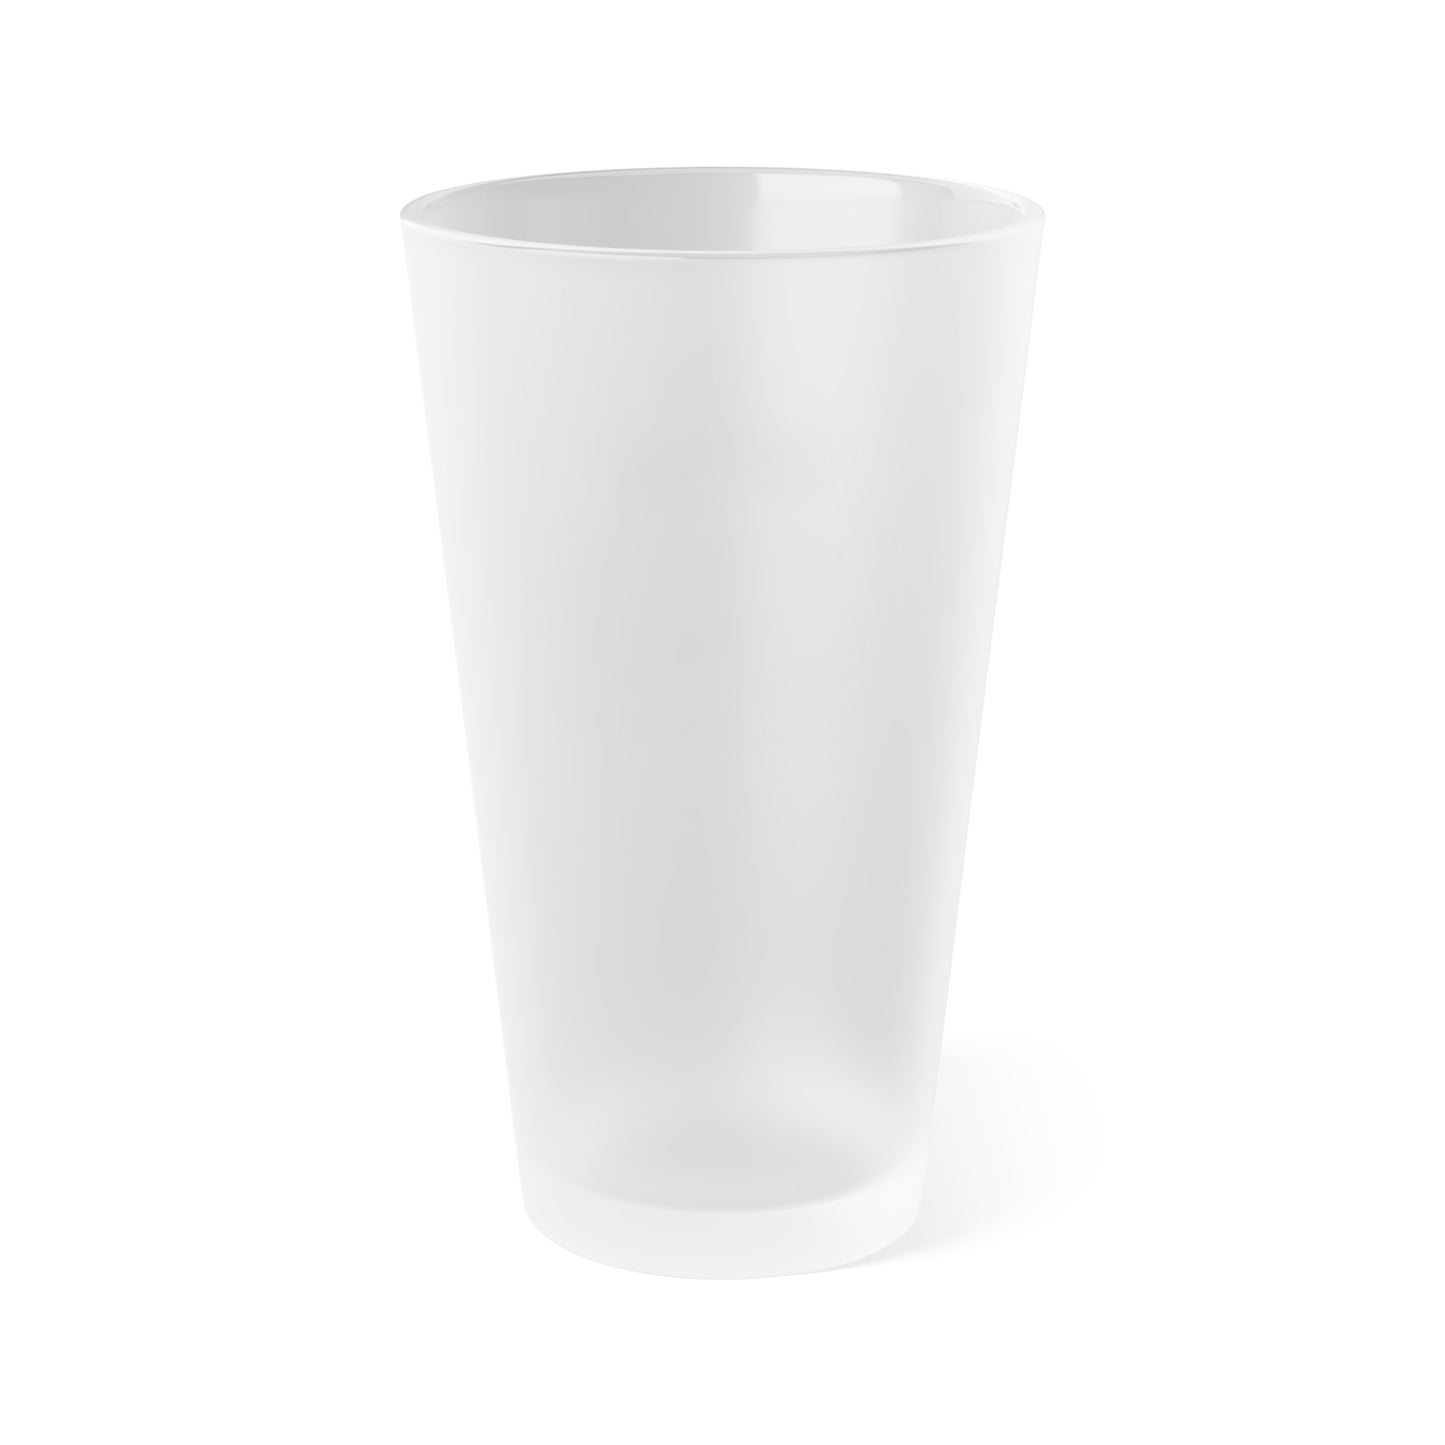 DTA Frosted Pint Glass